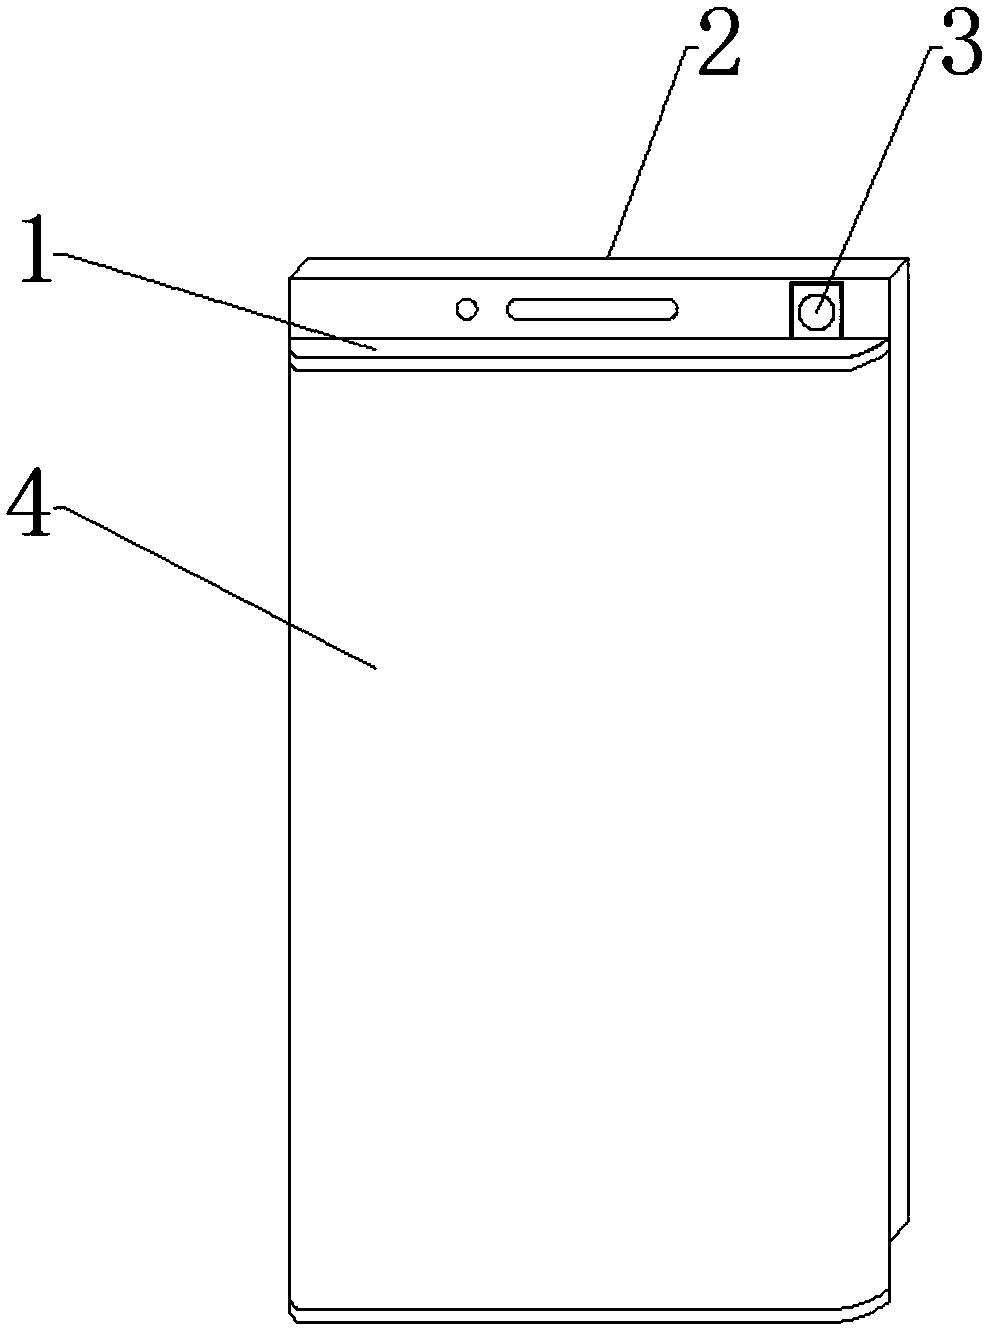 Full-screen mobile phone with capable of setting front camera in sliding manner